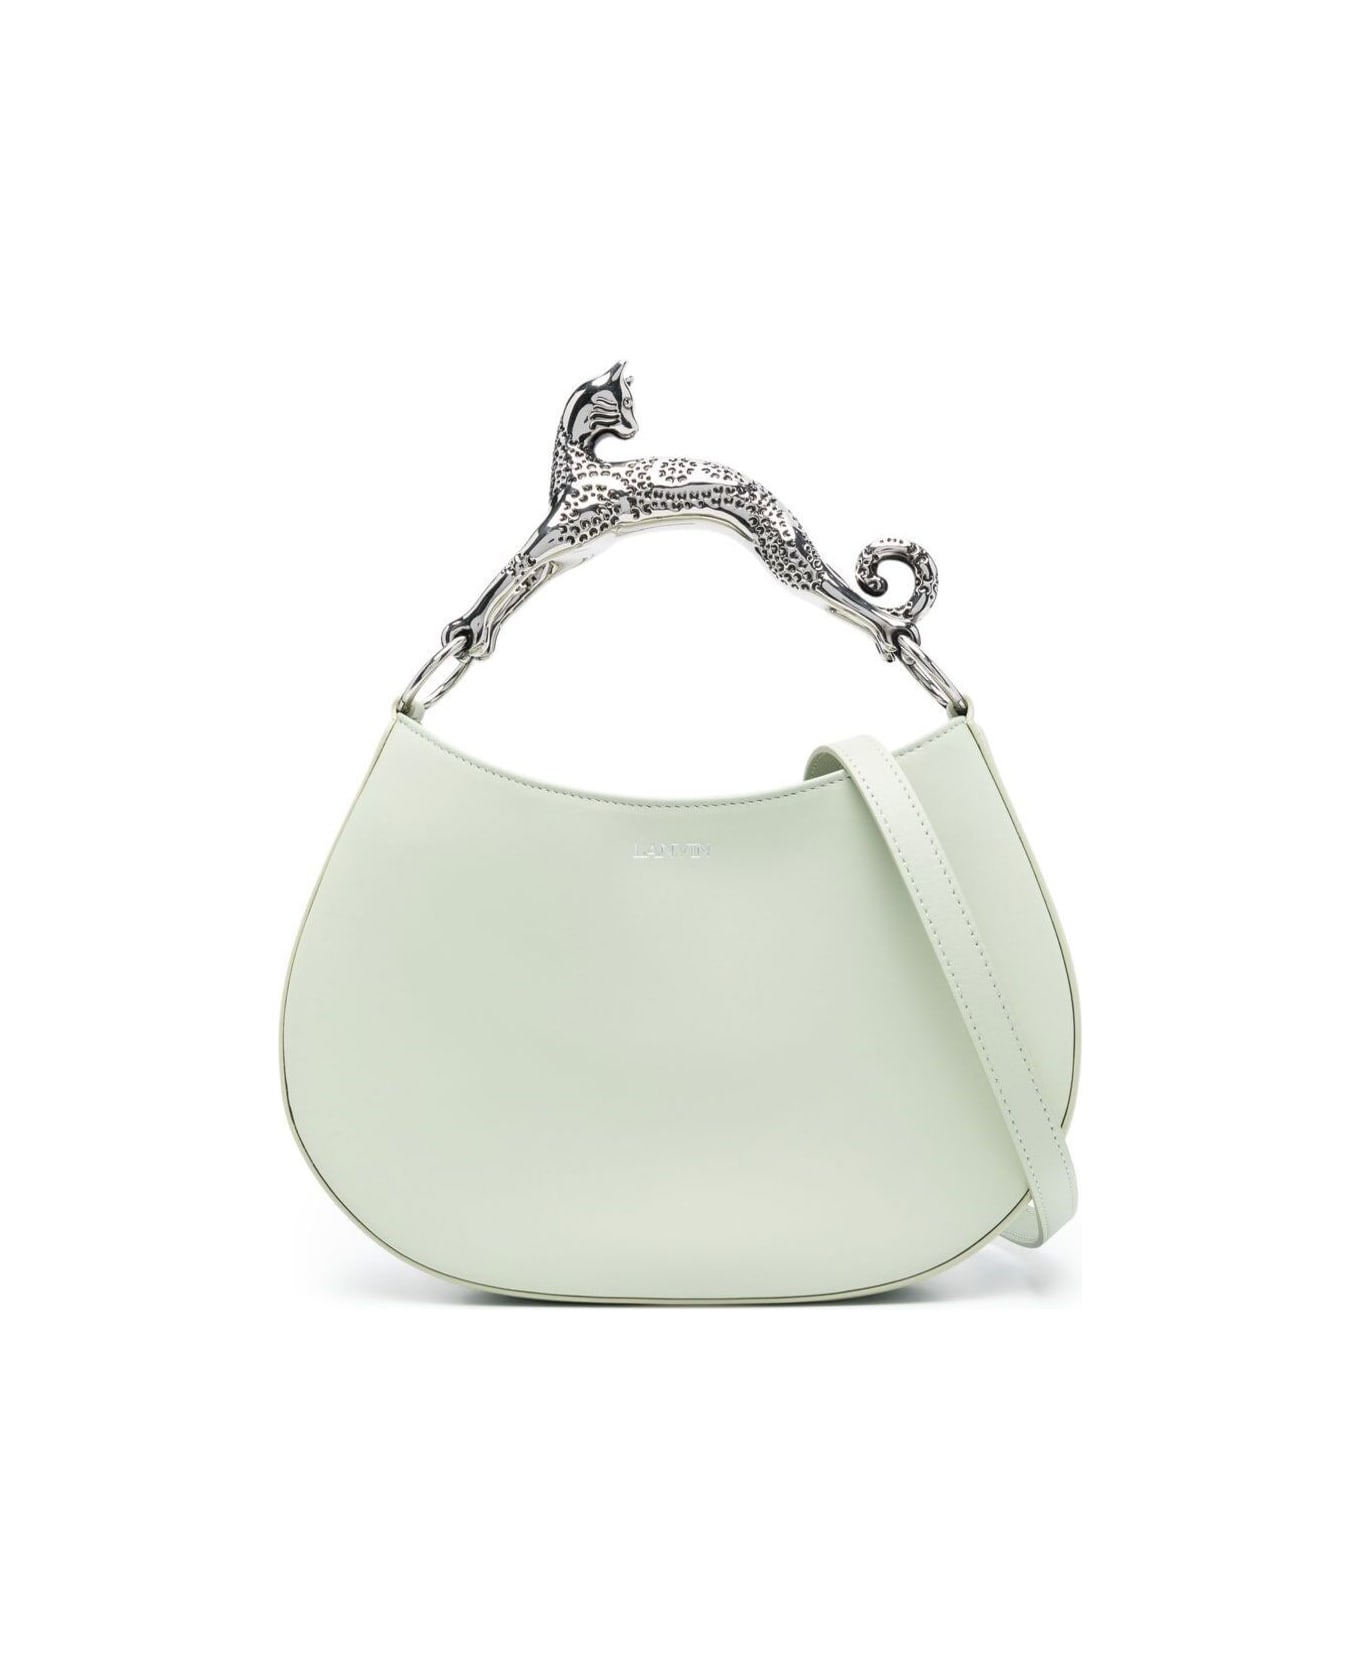 Lanvin Light Green Hobo Cat Bag With Embellished Metal Handle In Leather Woman - SAGE